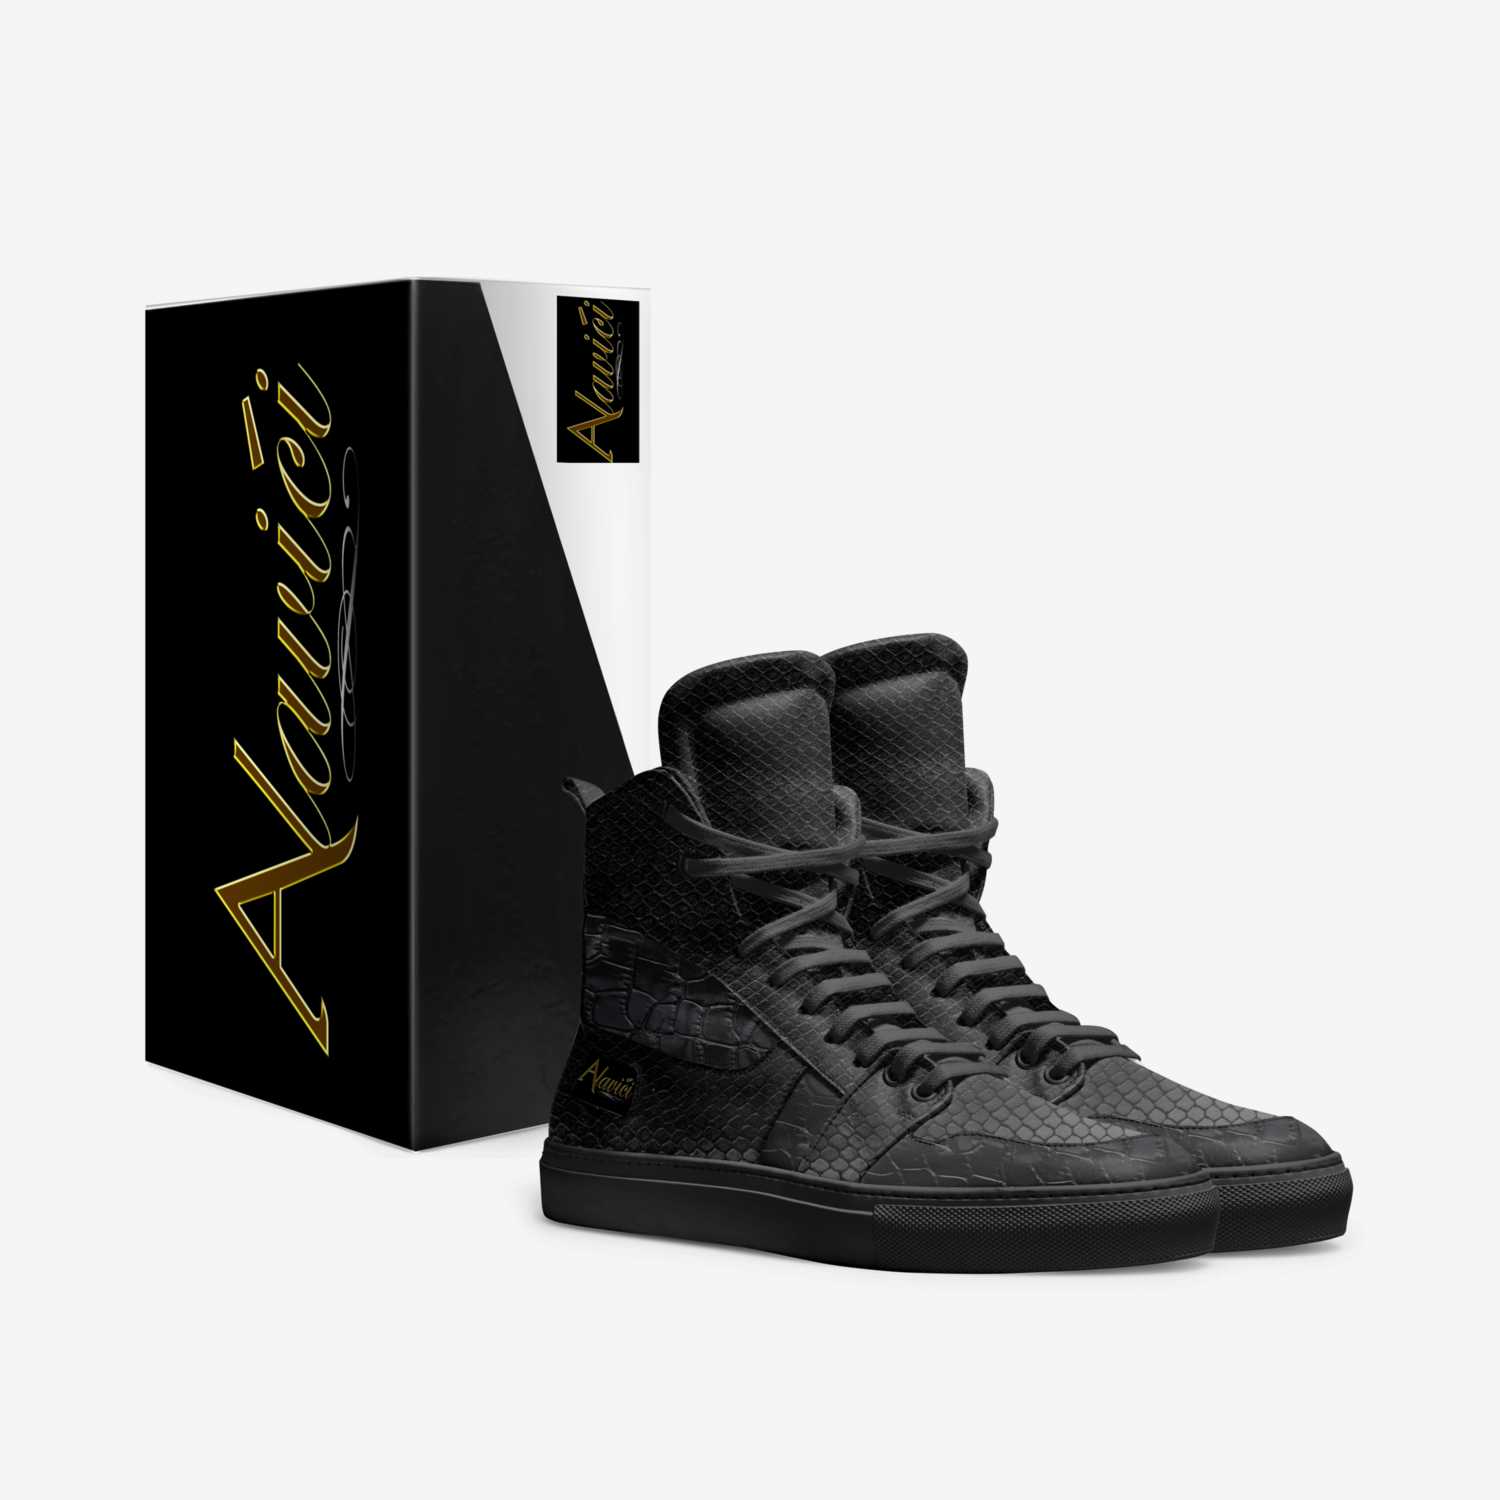 alavici custom made in Italy shoes by Maurice Glover | Box view